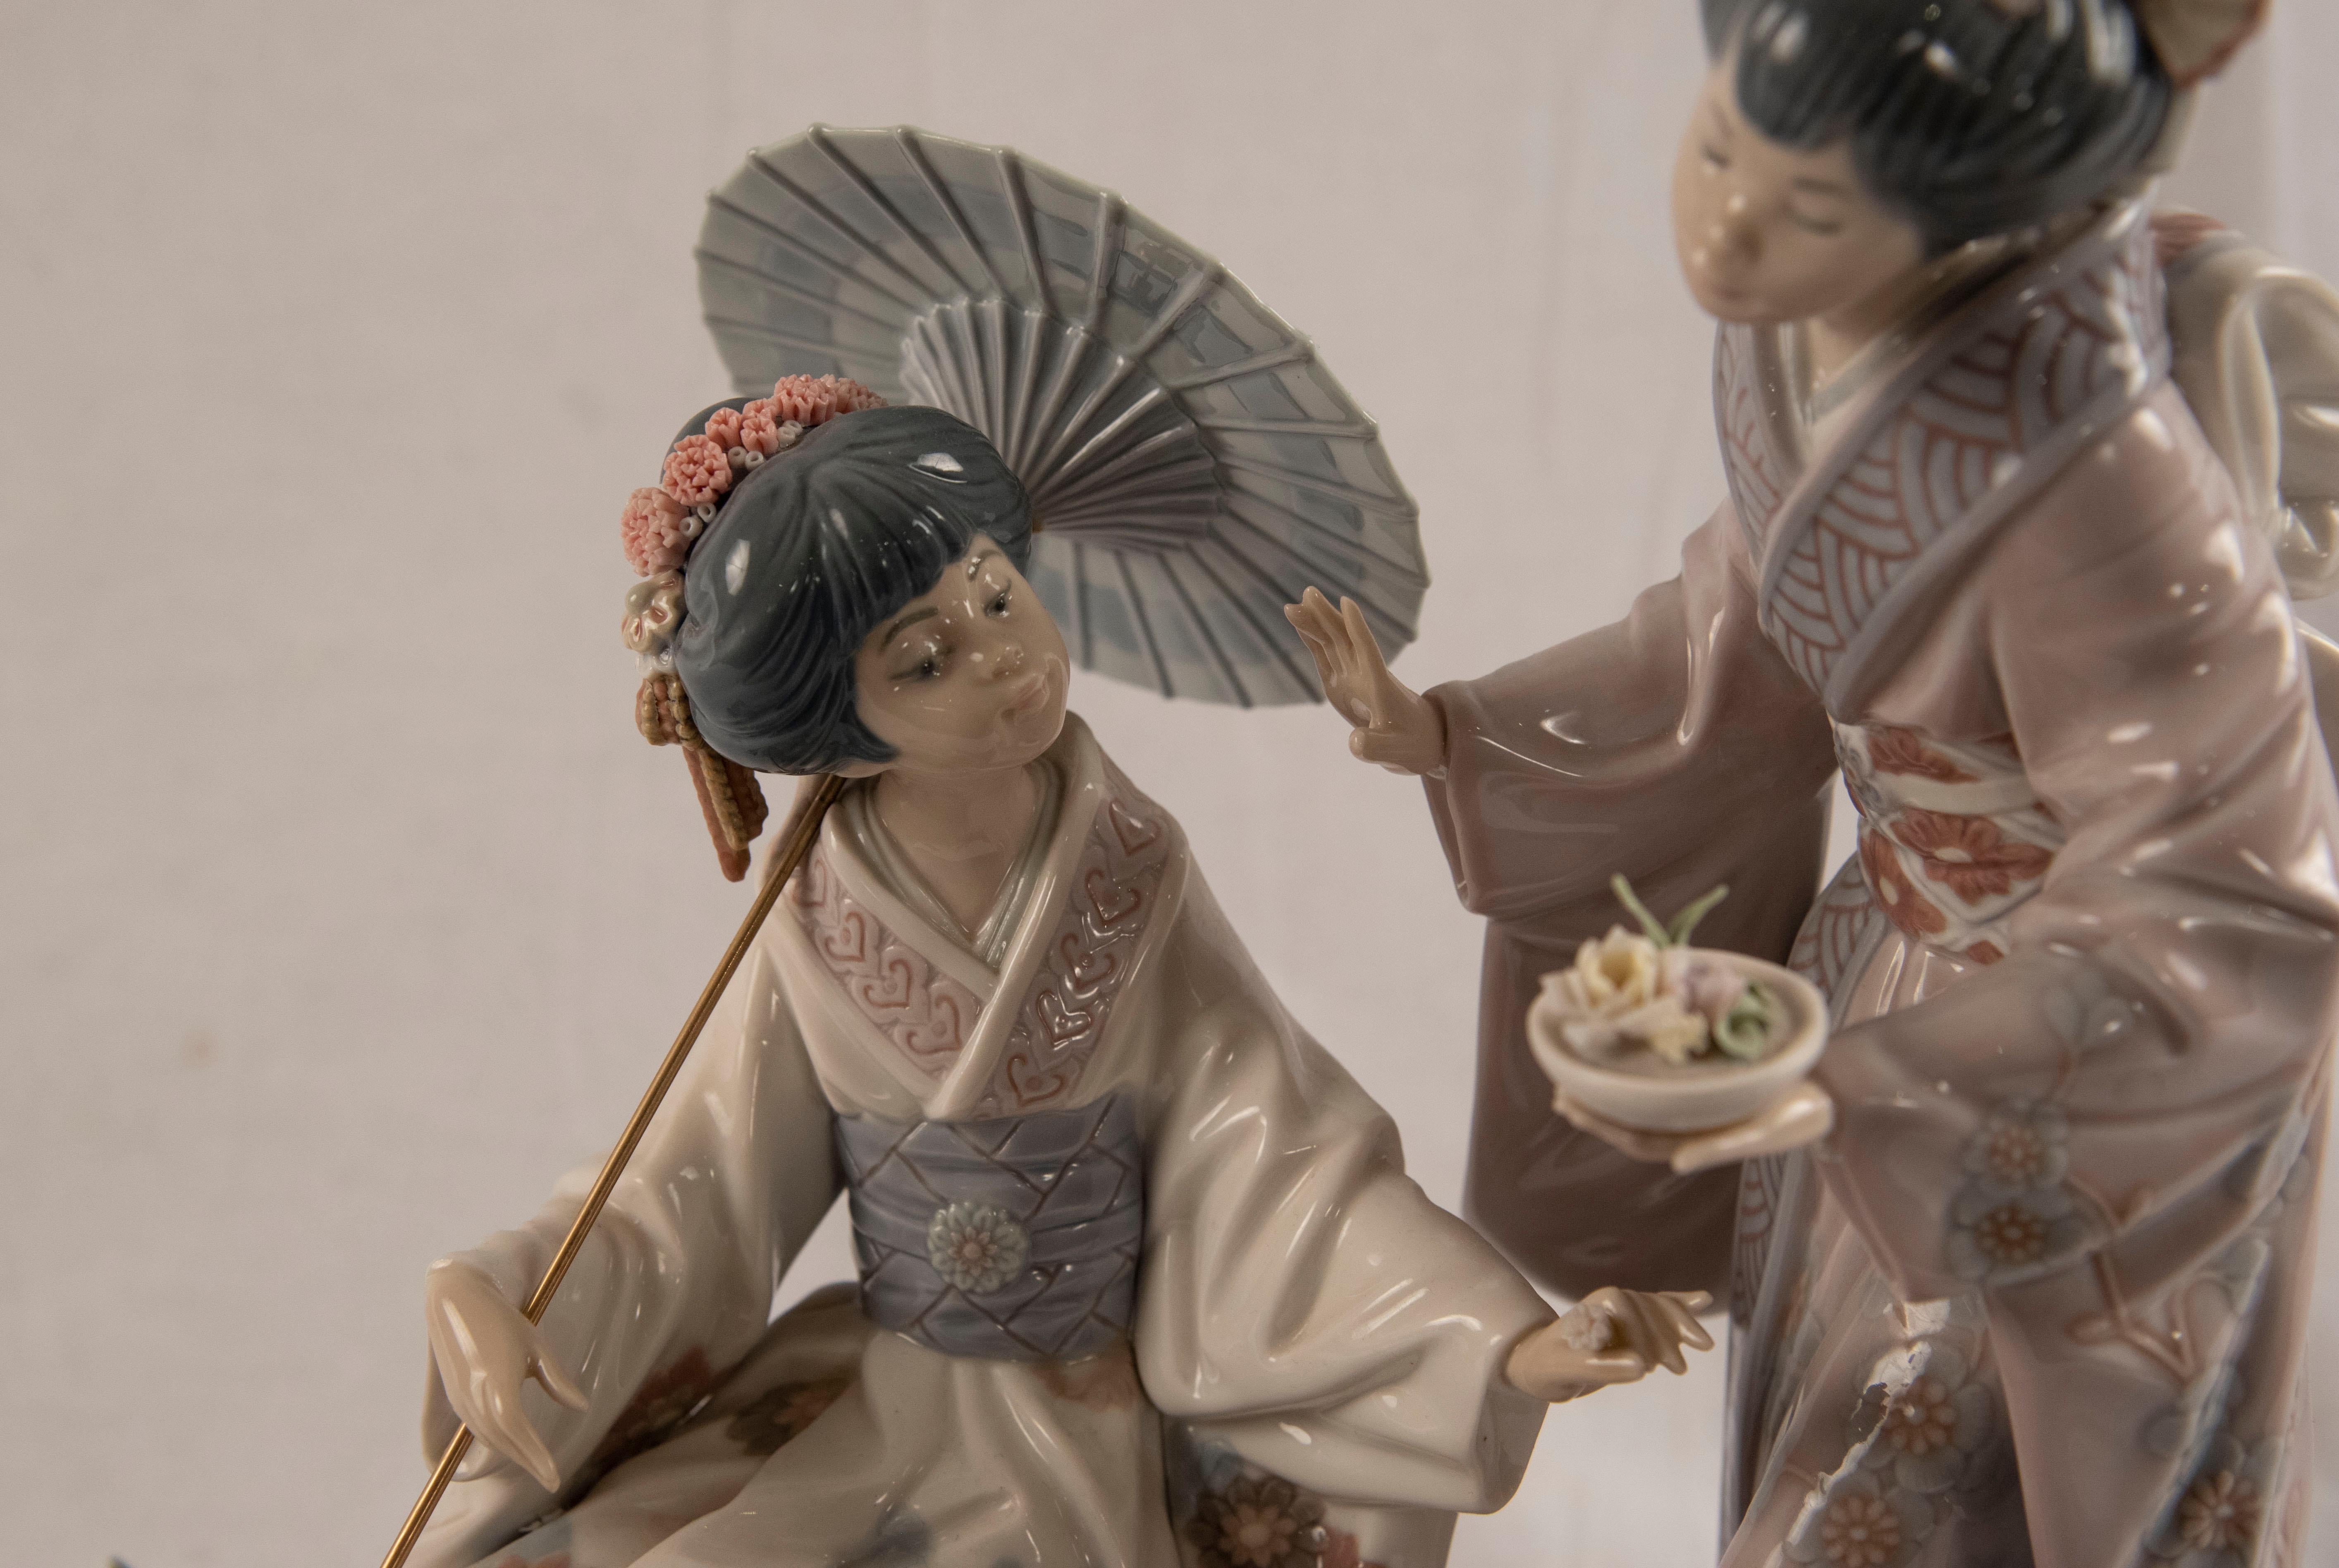 Glossy porcelain sculpture of Japanese women on a bridge with an umbrella decorated with handmade flower and floral motifs on a wooden base. Model #1445.